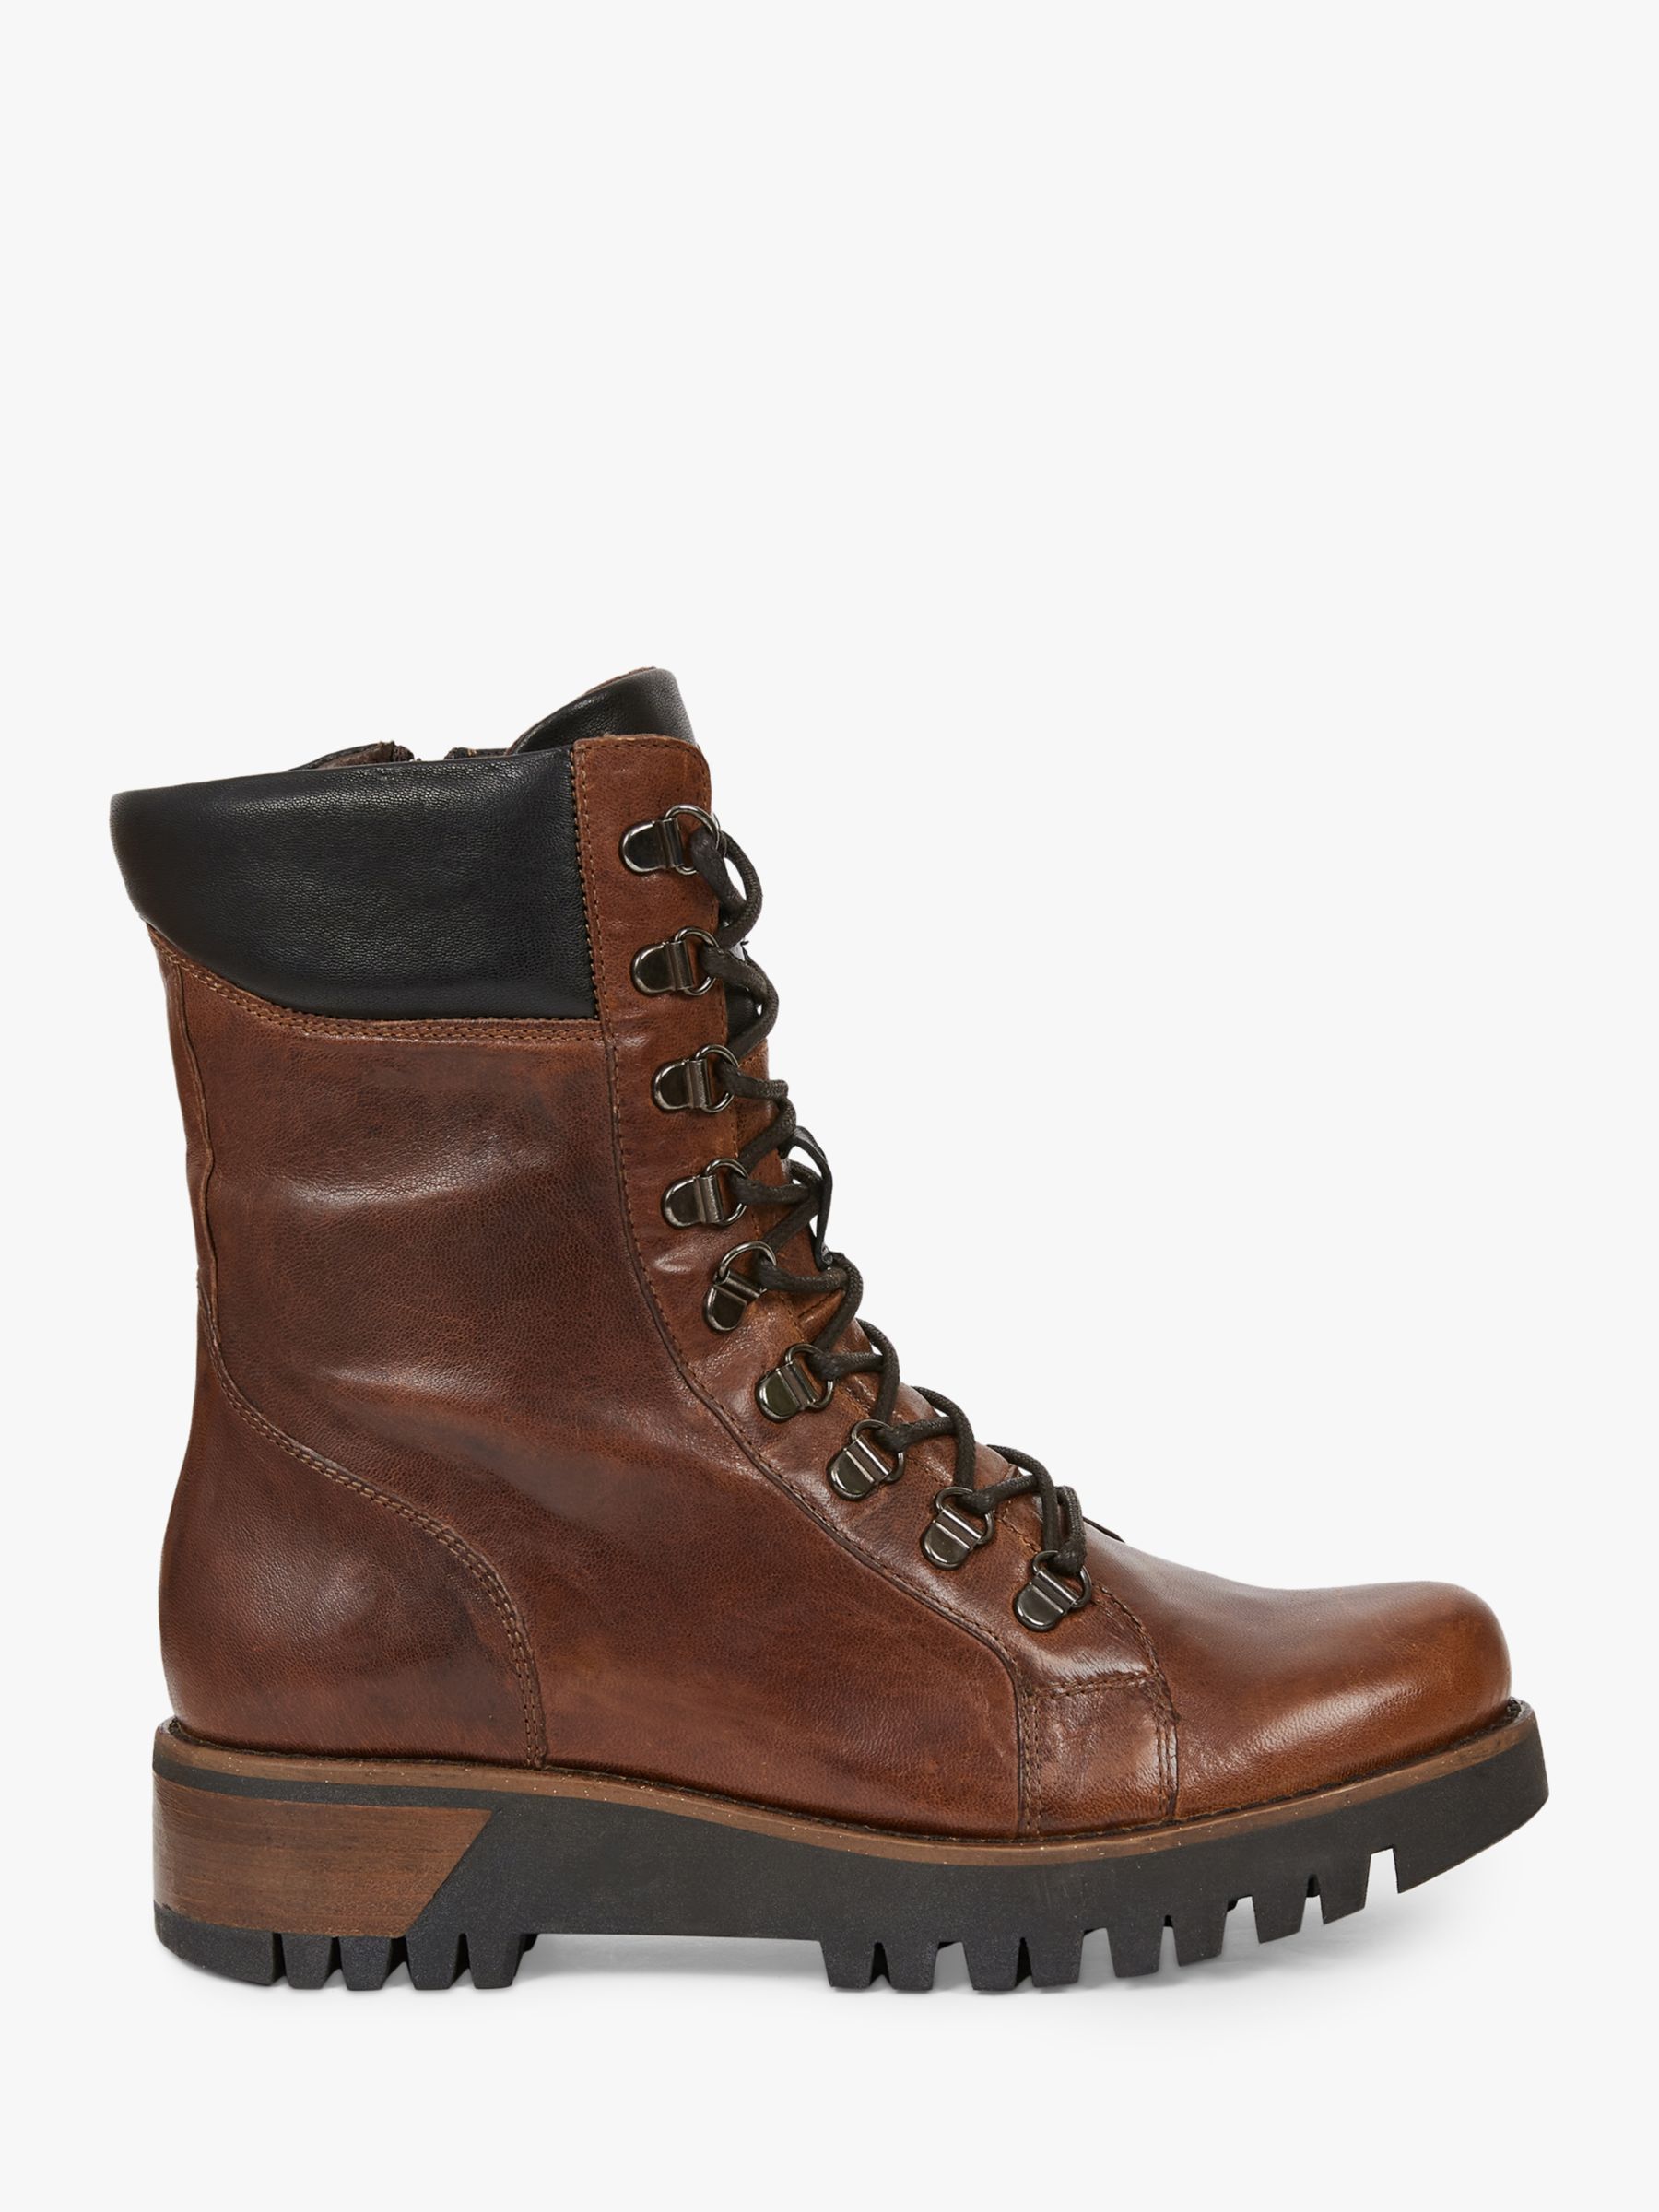 Celtic & Co. Wilds Leather Lace Up Boots, Rust, 3